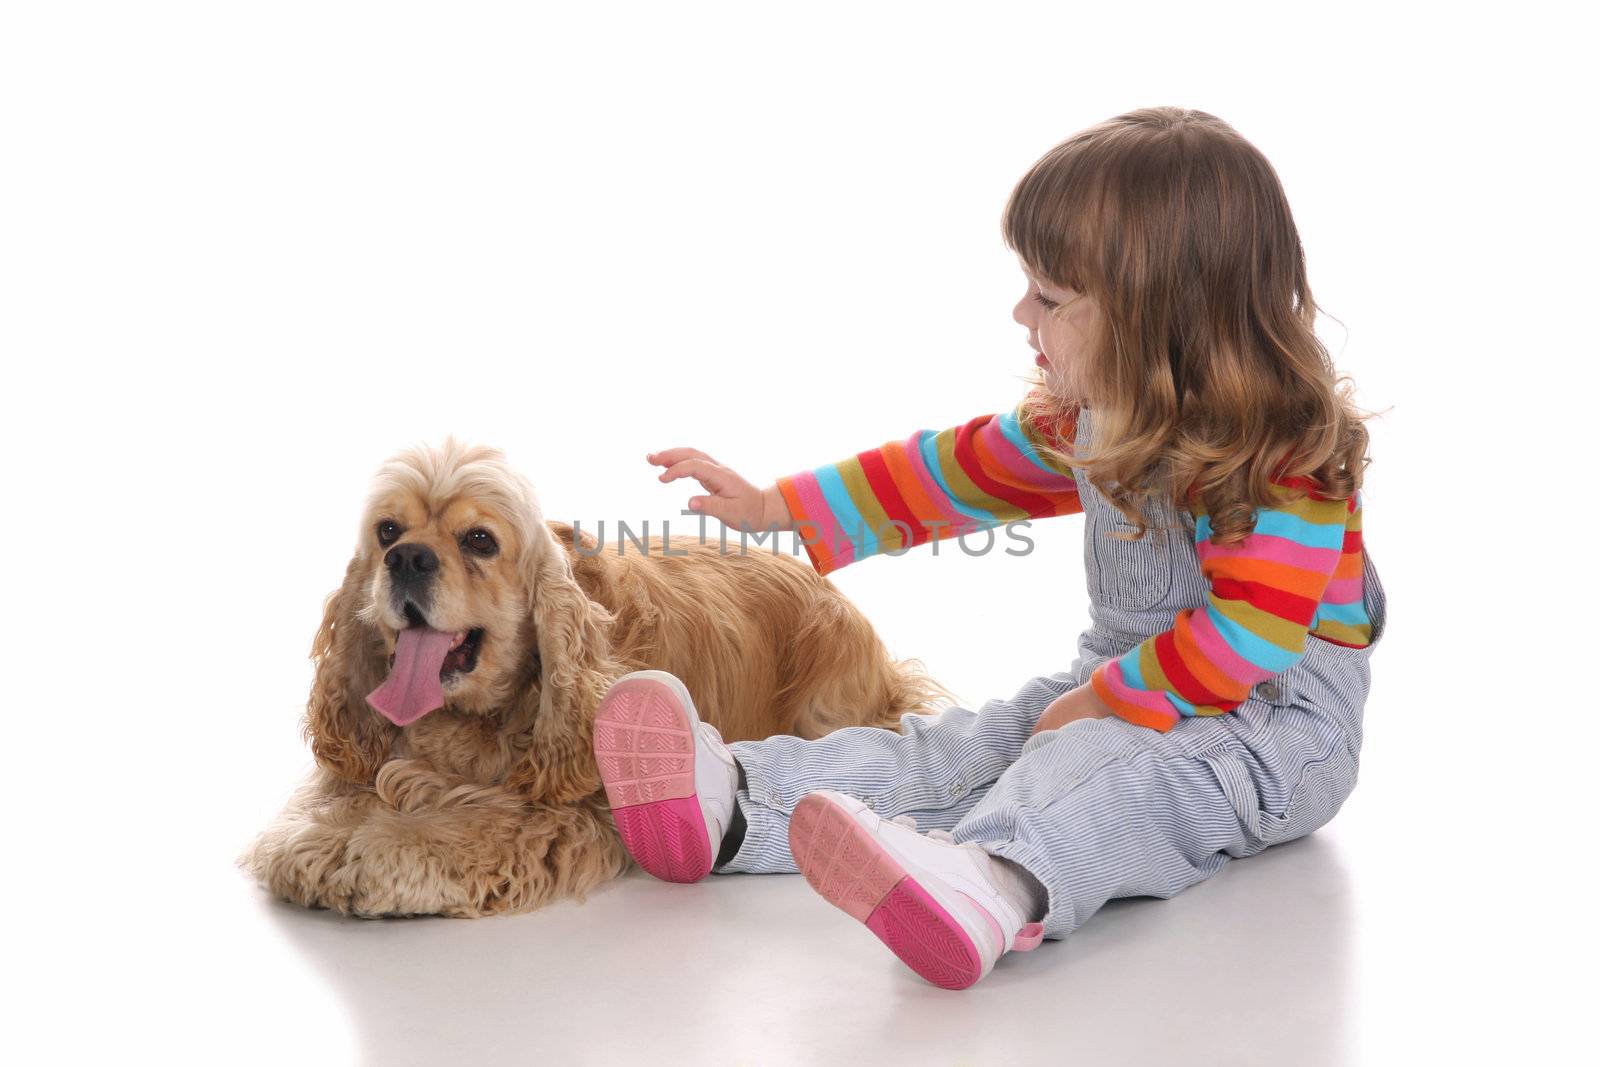 beauty a little girl and American Cocker Spaniel